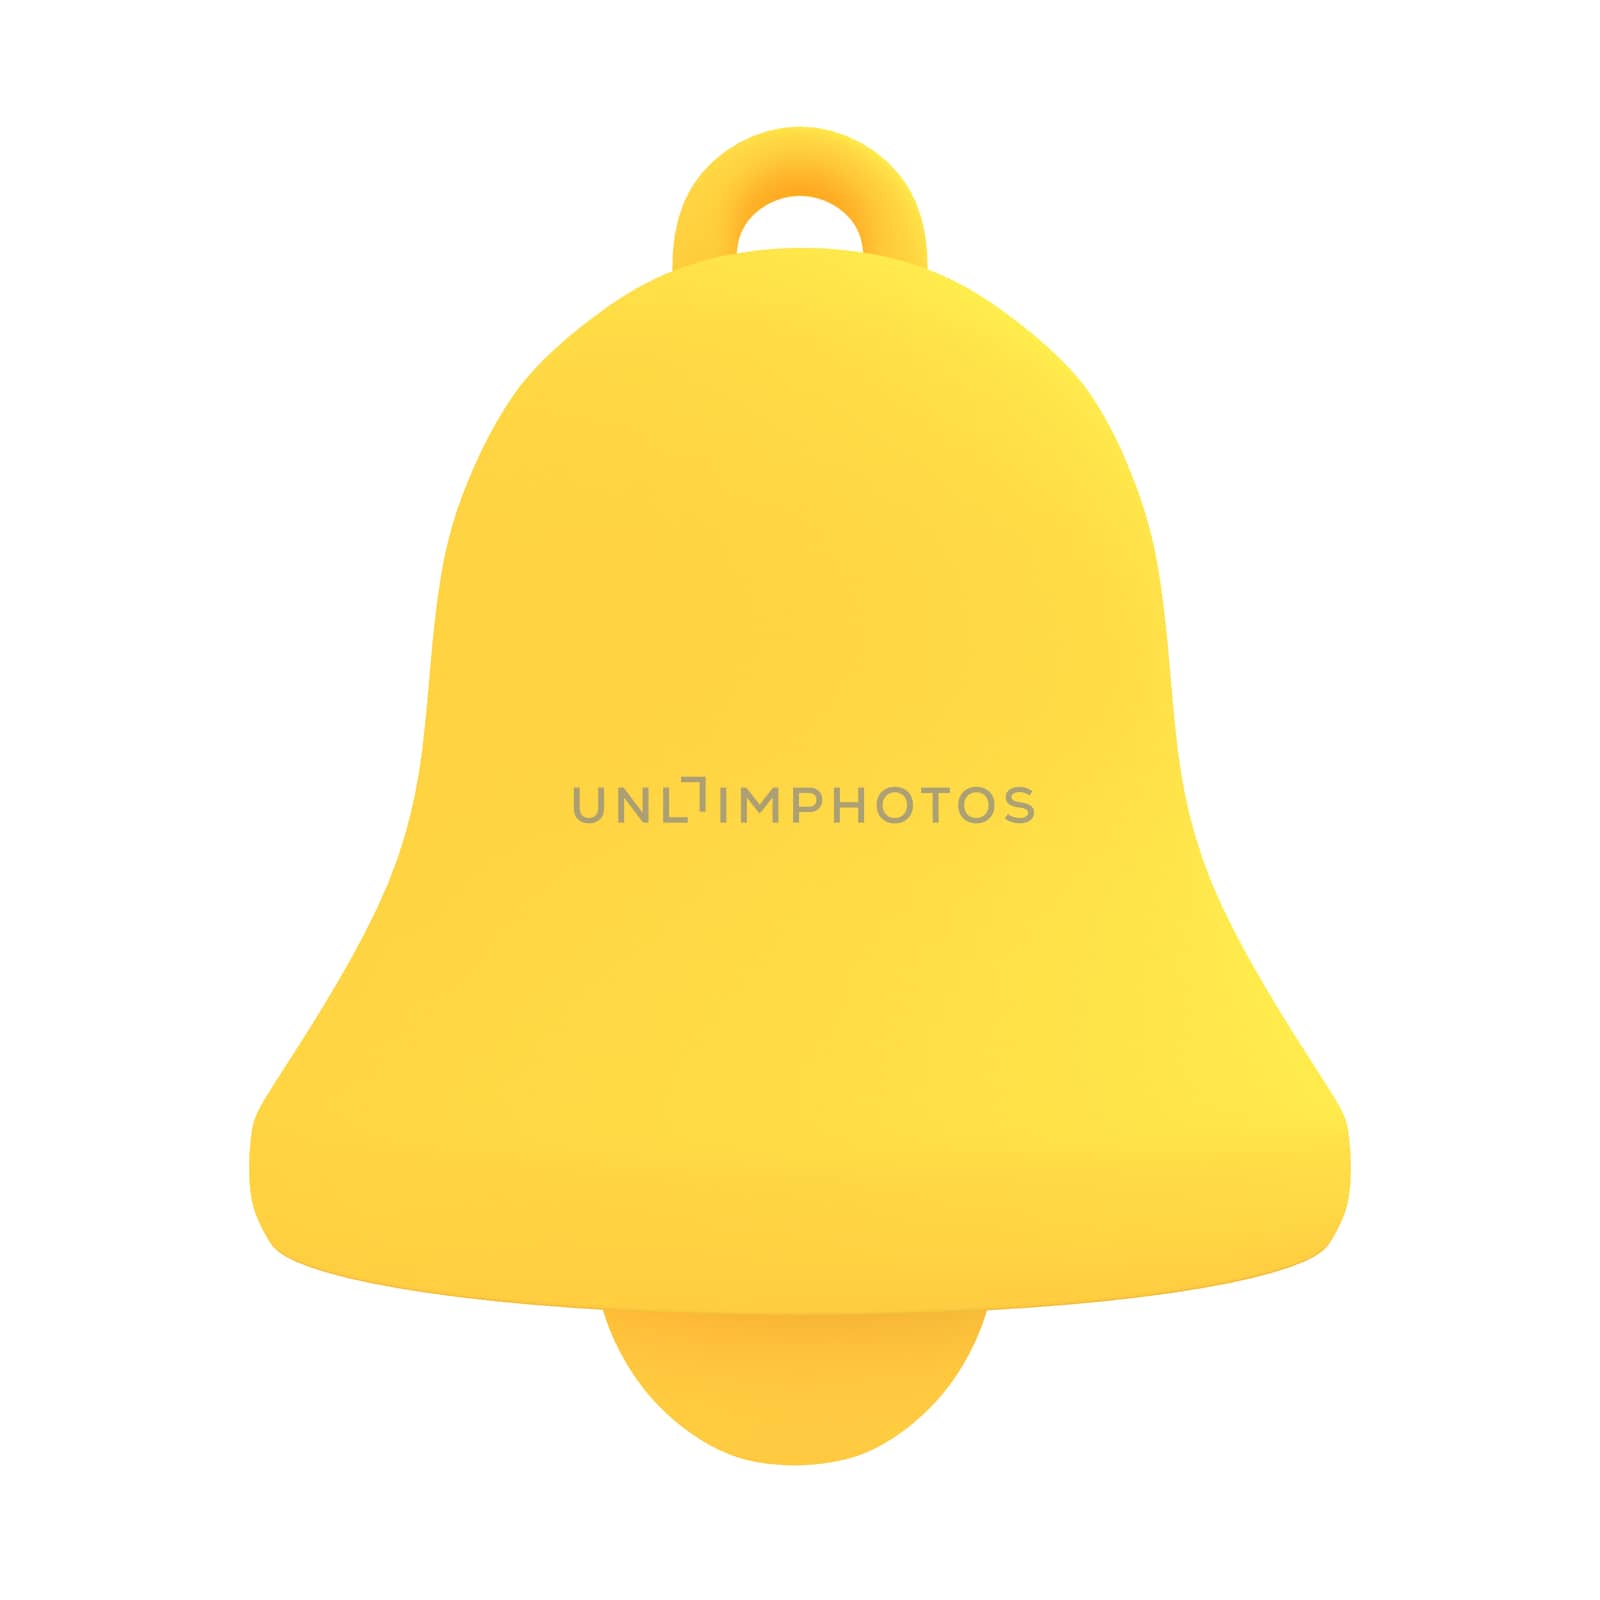 3D render illustration of yellow bell over isolated on white background